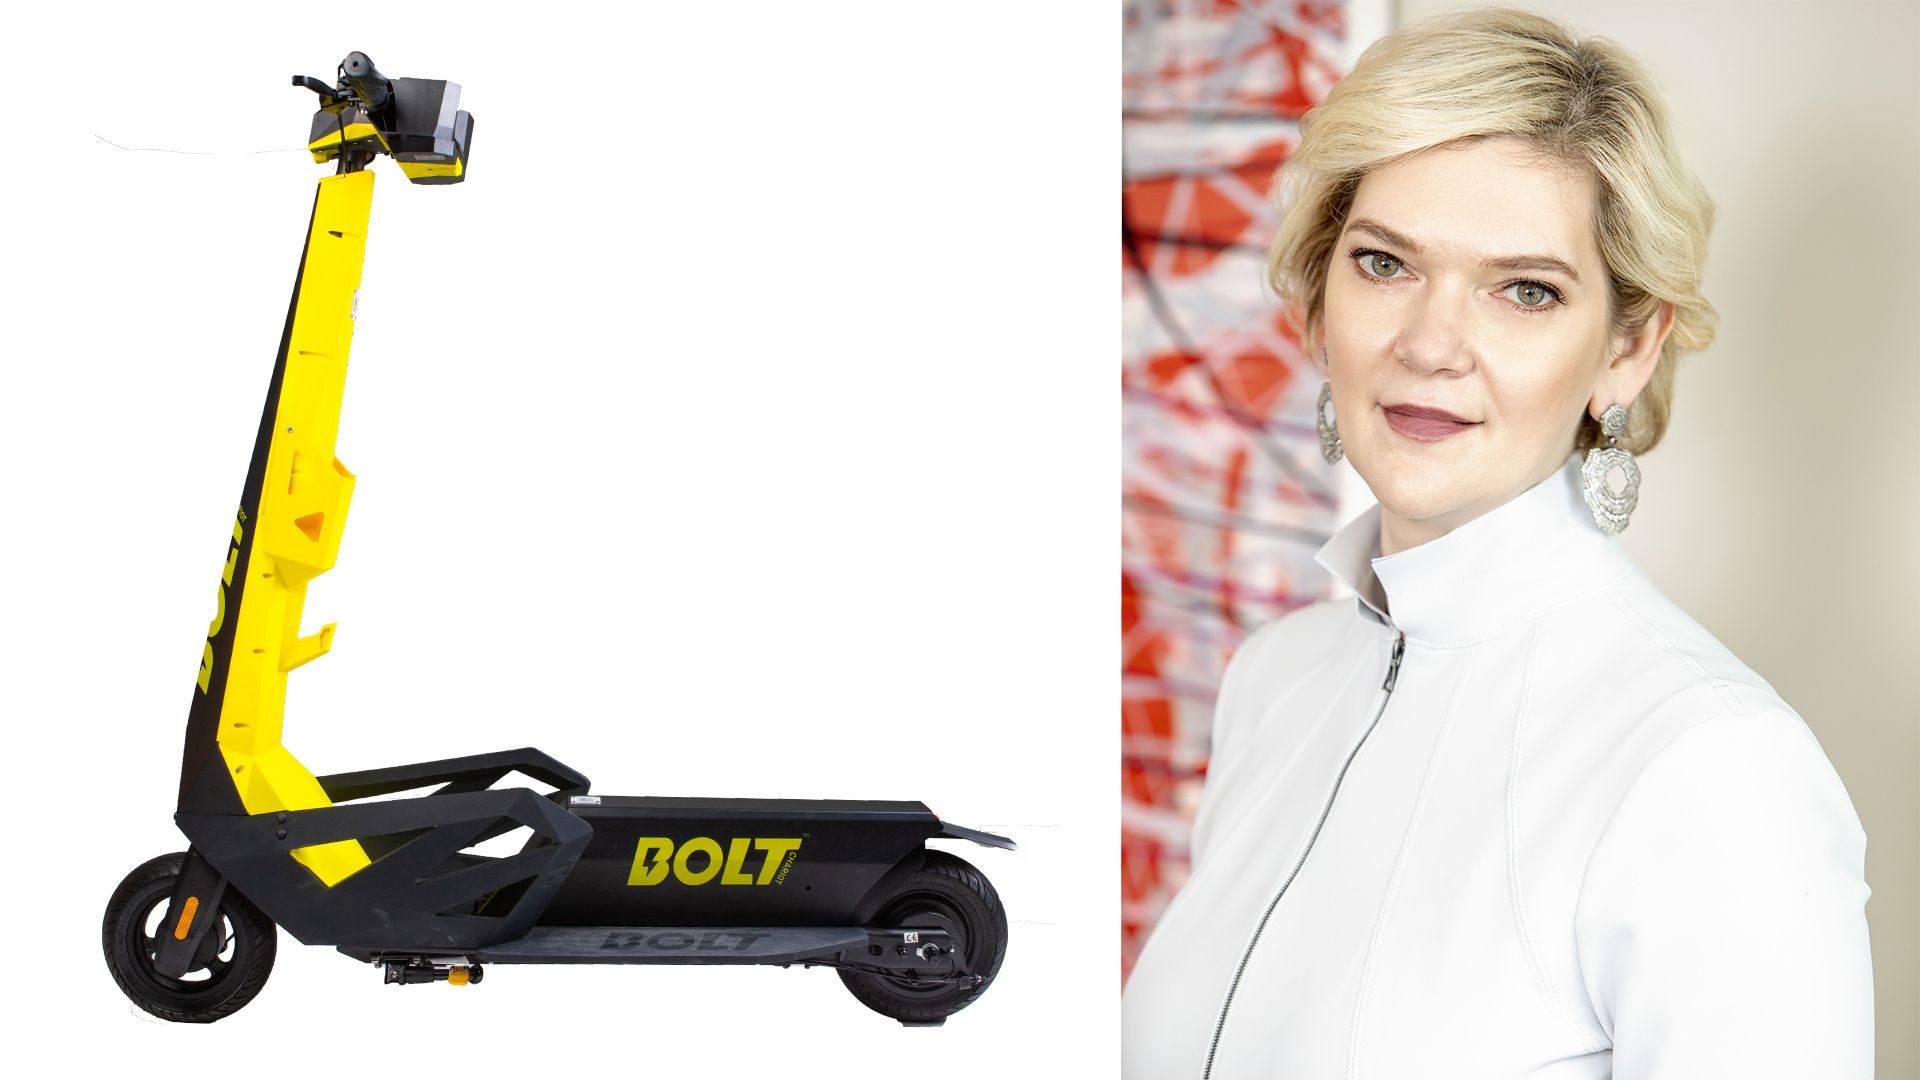 side-by-side images of Bolt Mobility scooter and CEO Julia Steyn